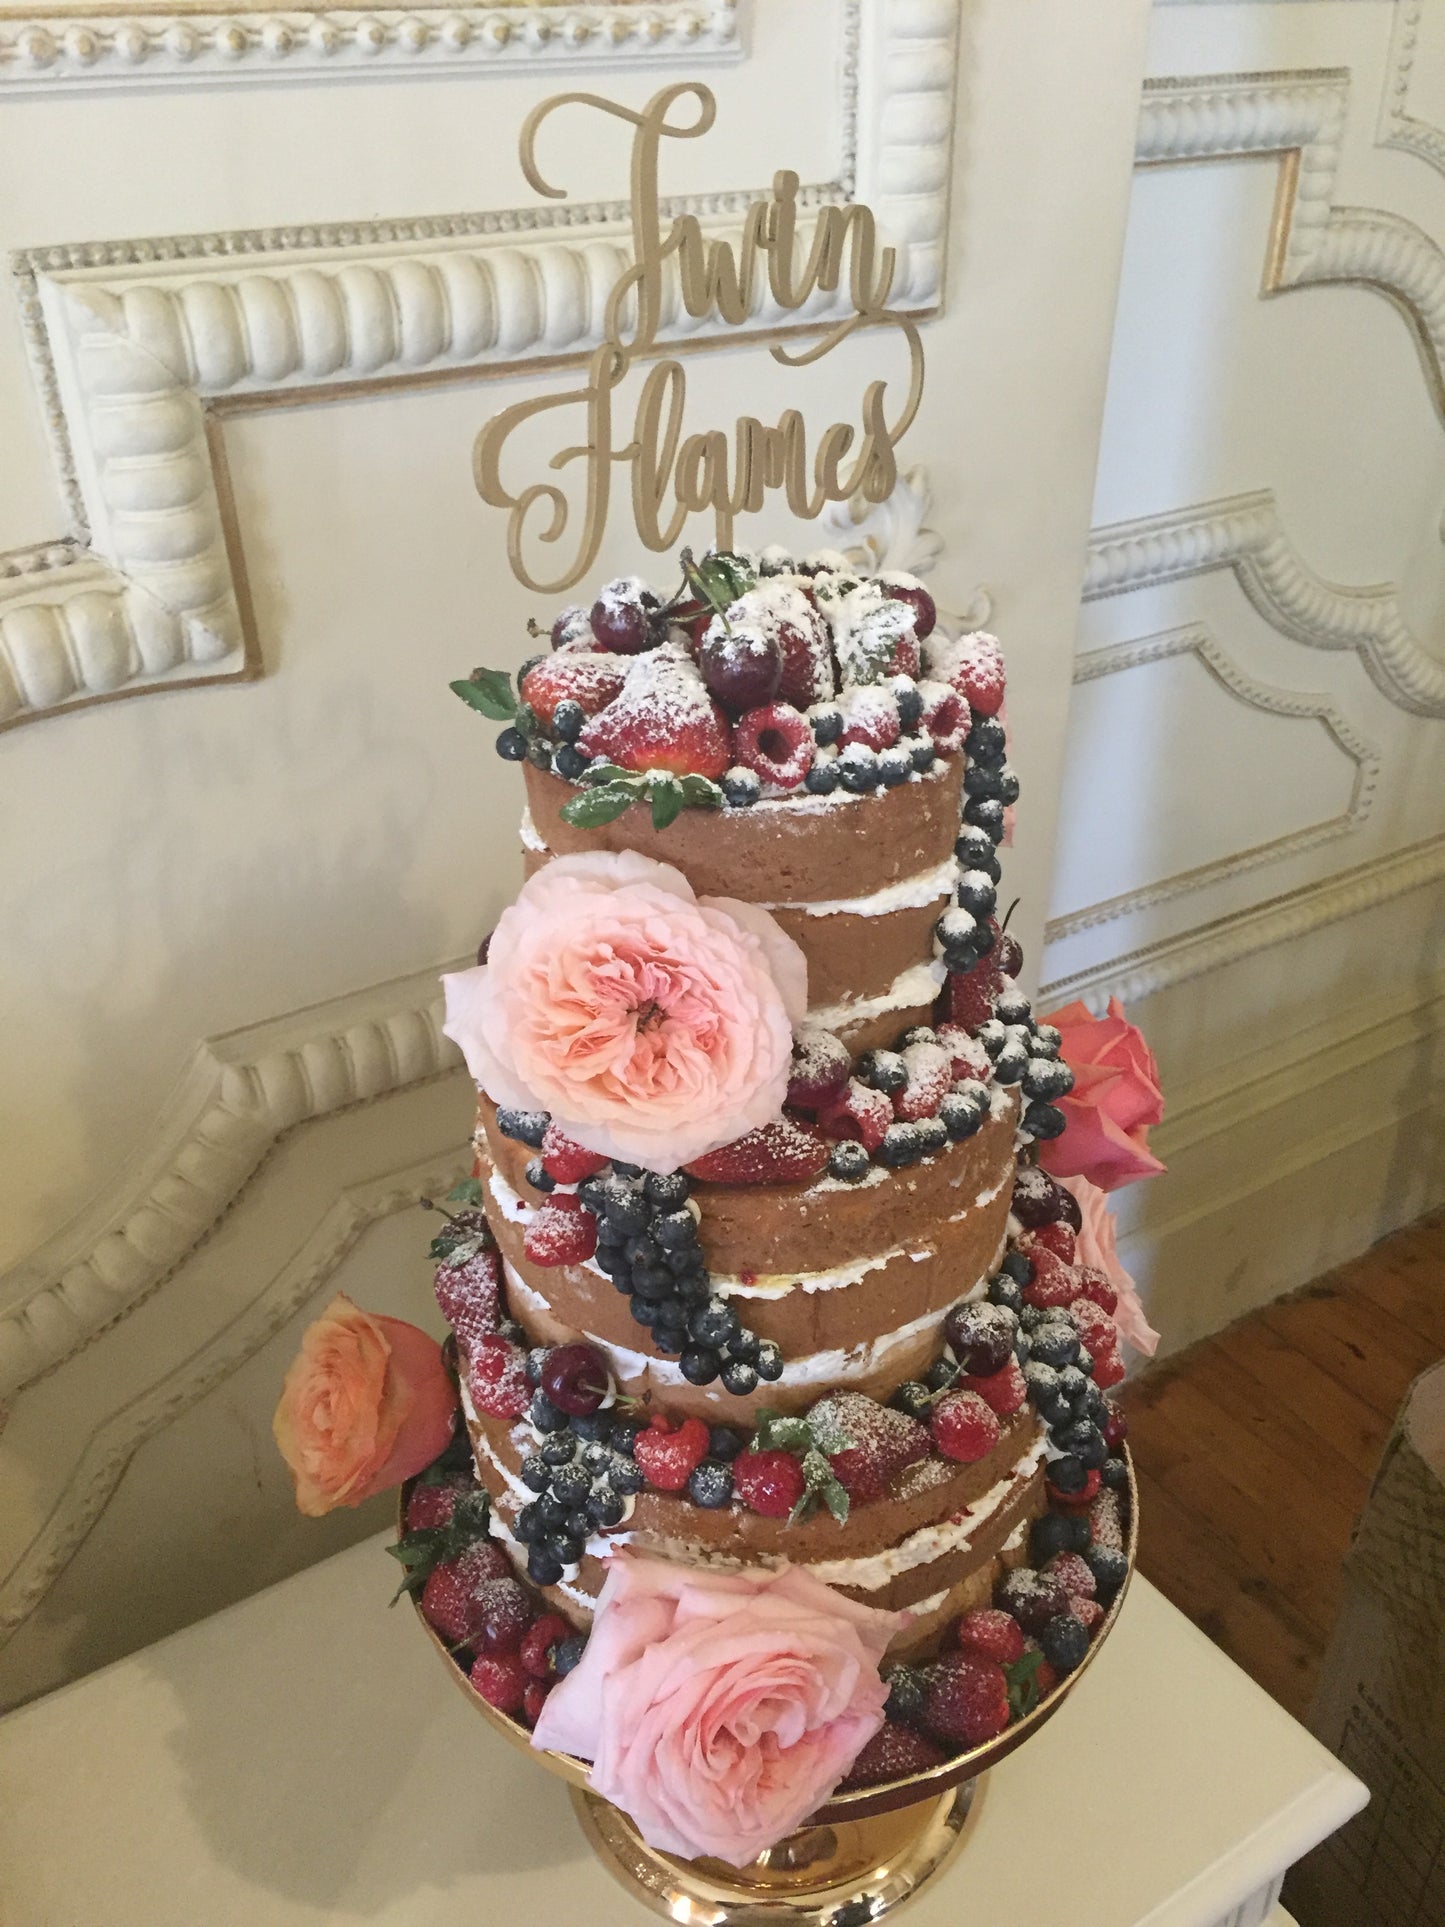 3 Tier Naked Cake with Berries and Roses